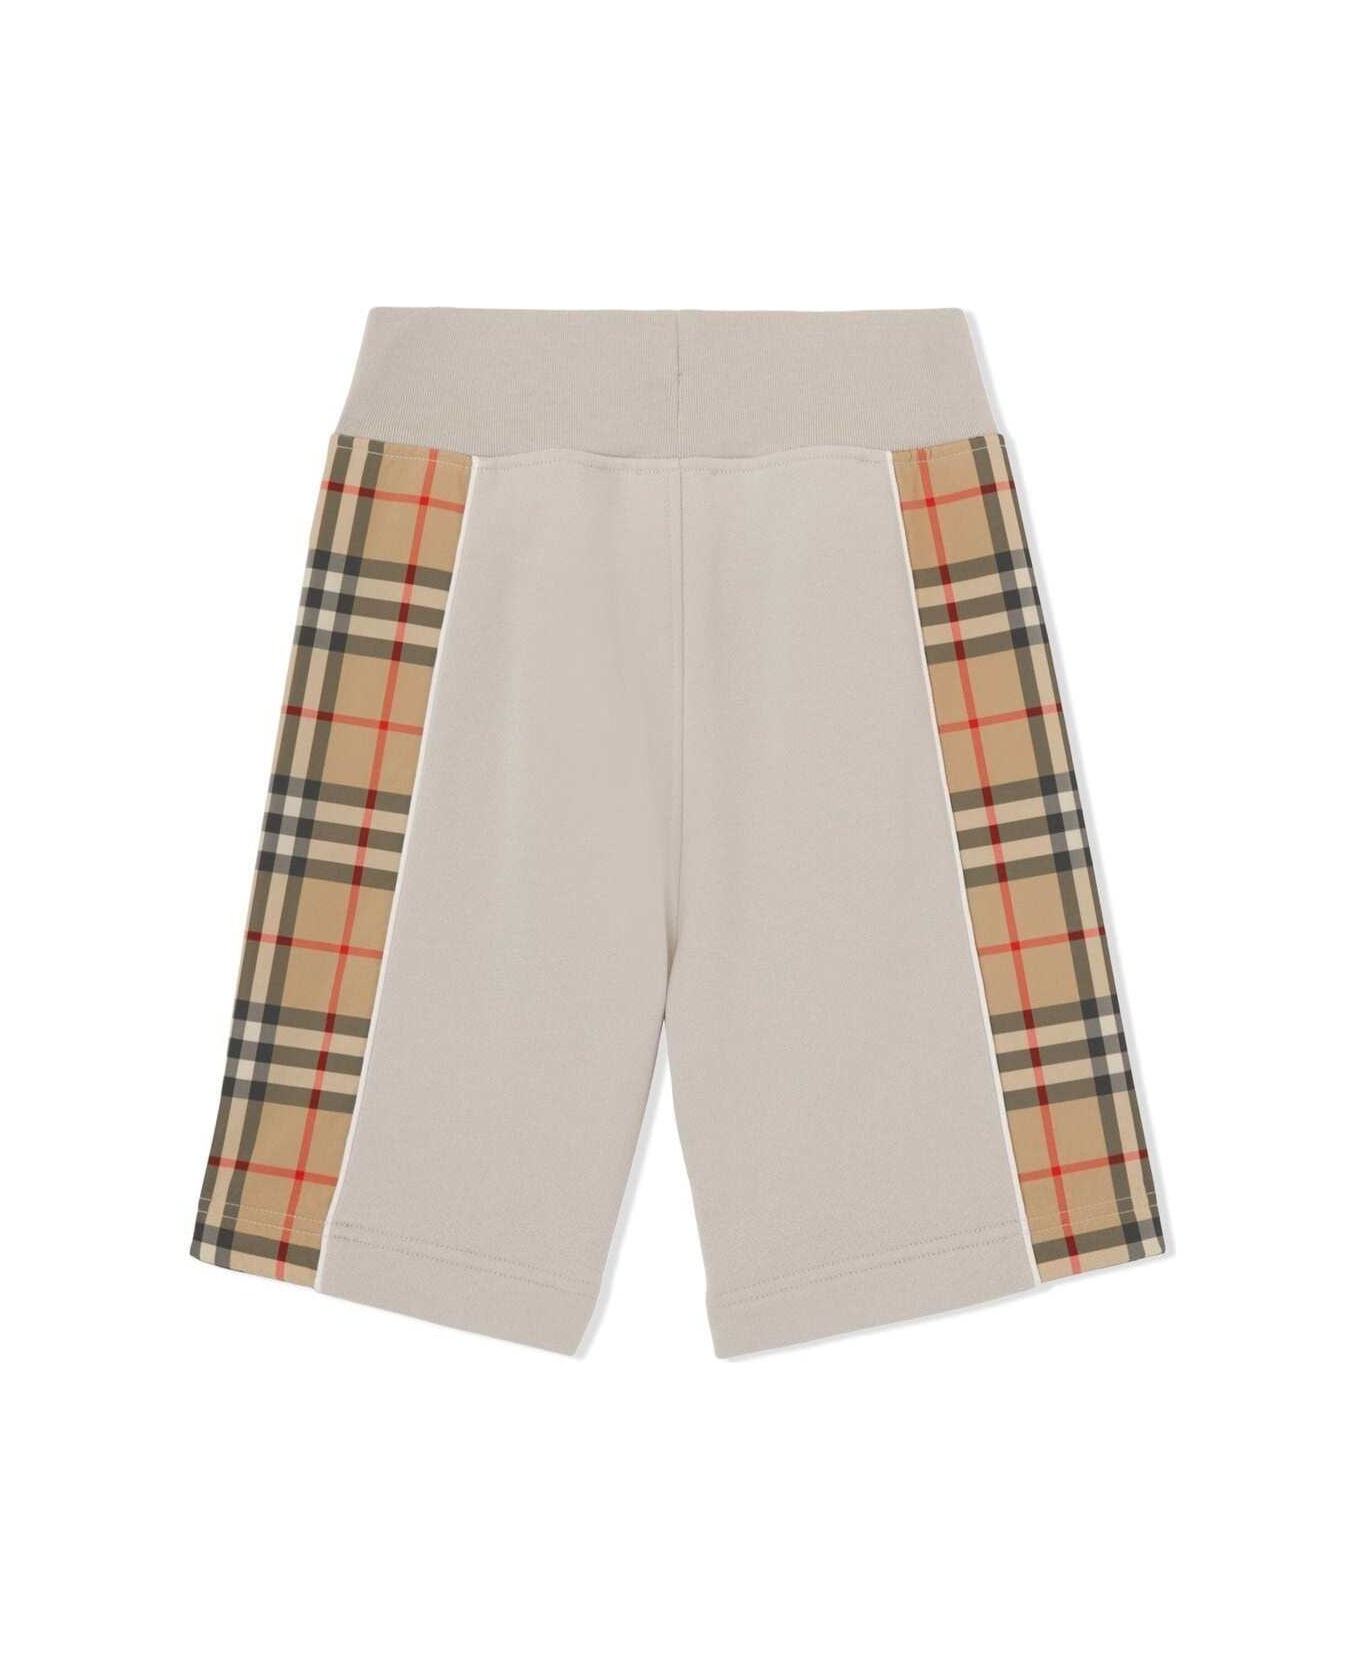 Burberry Beige Bermuda Shors With Vintgage Check Motif In Cotton Kids - Grey